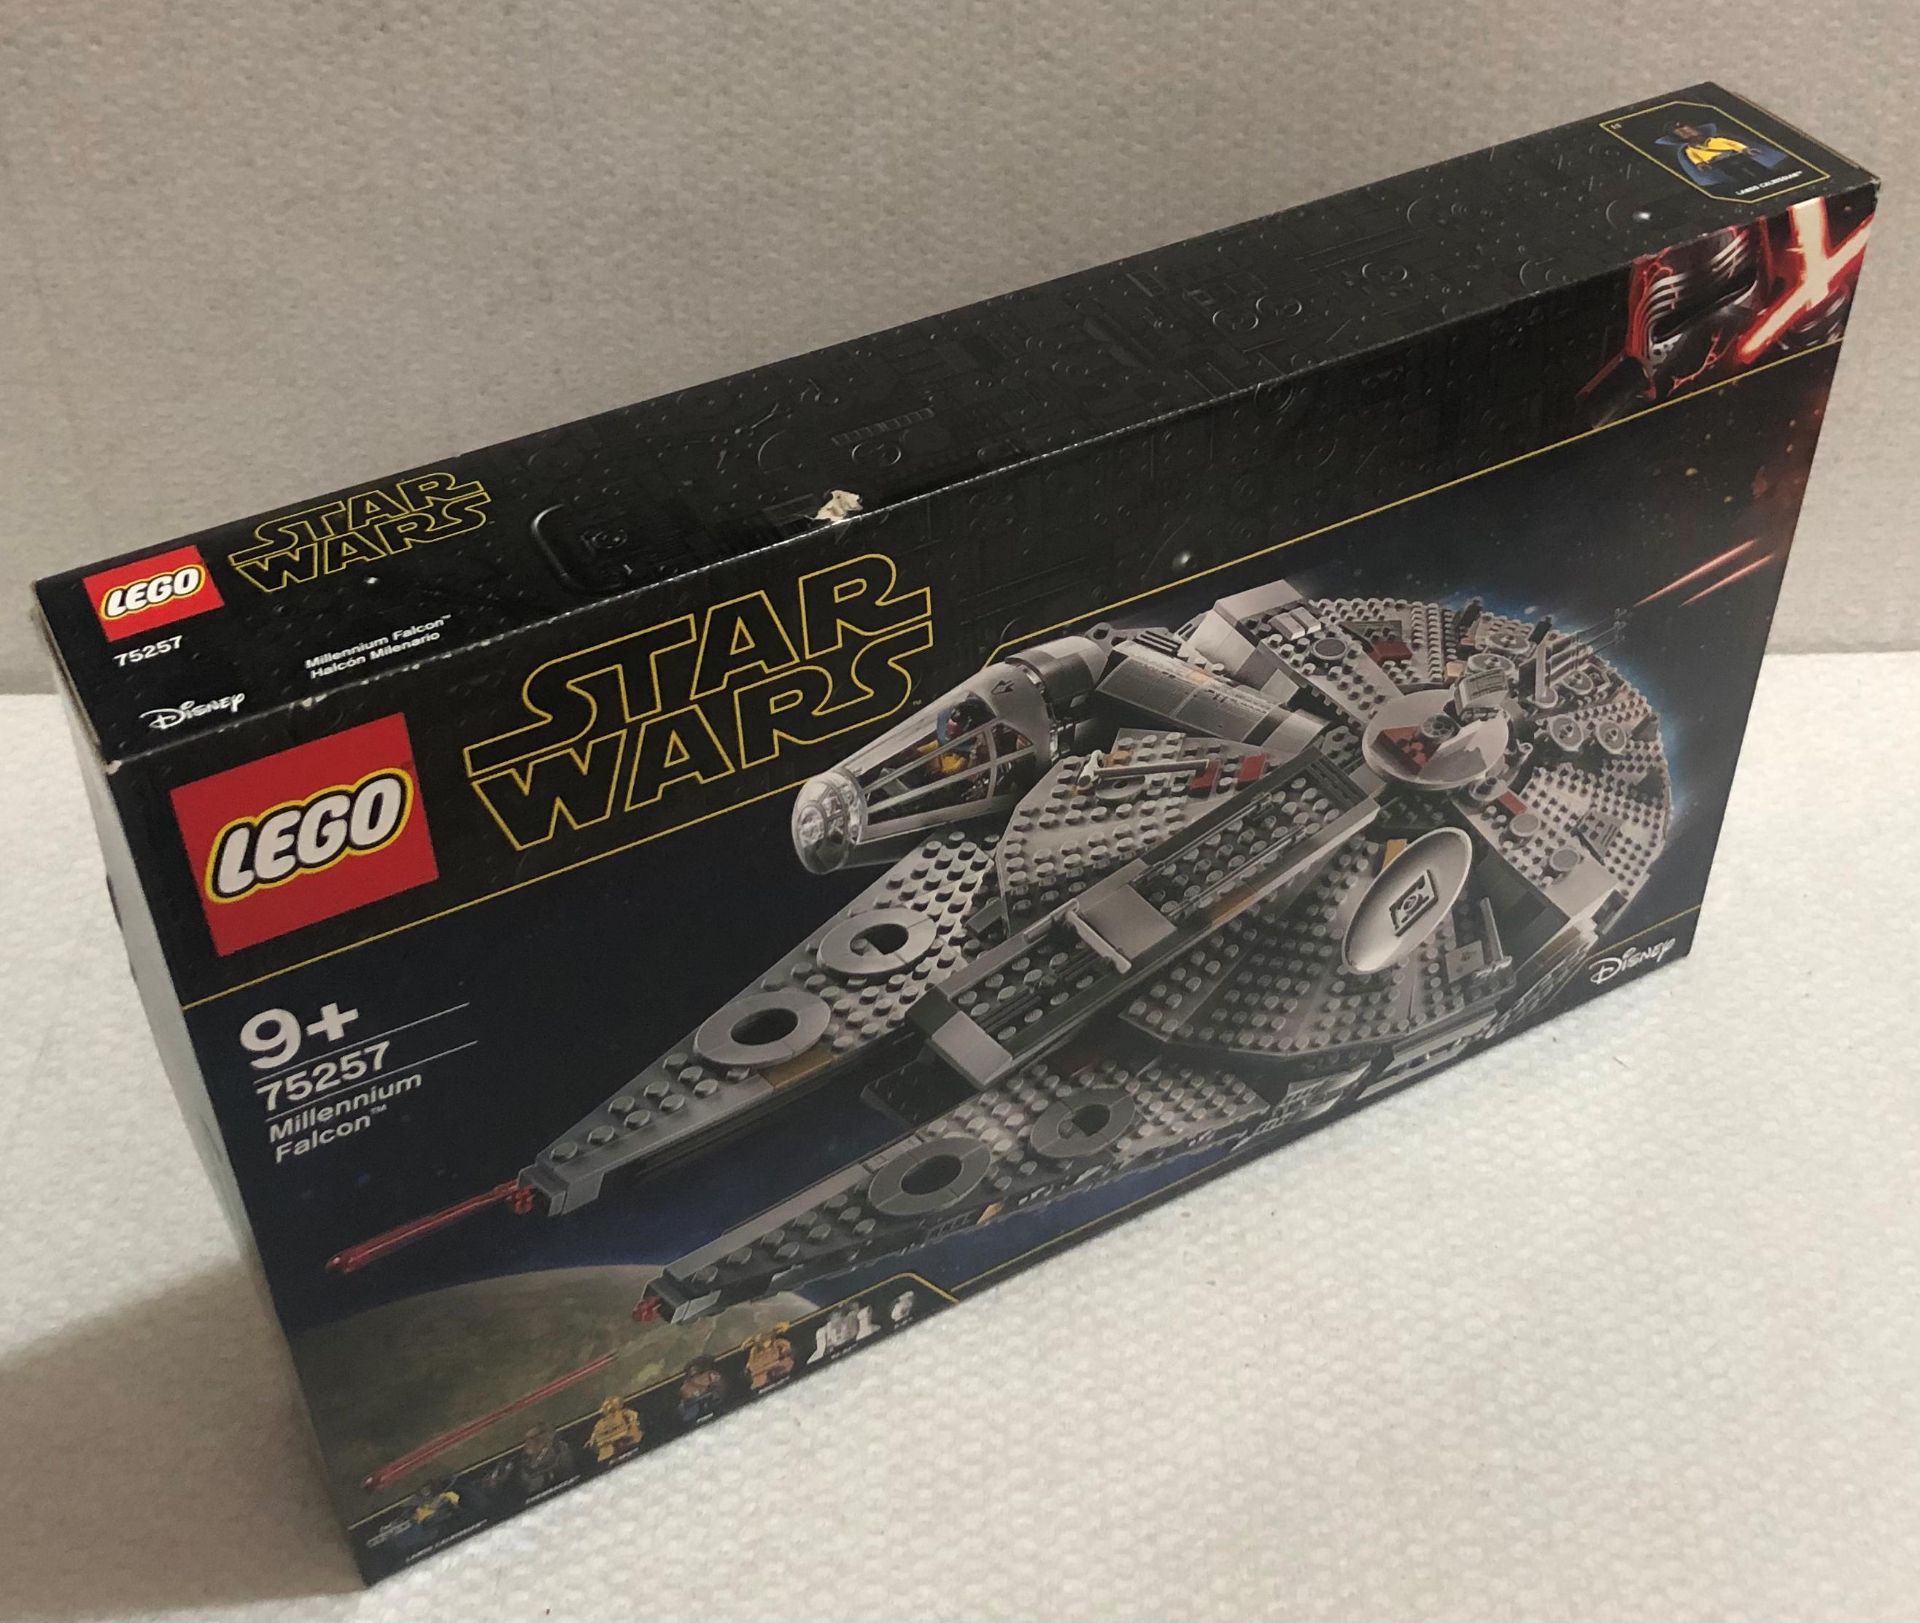 1 x Lego Star Wars Millenium Falcon - Model 75257 - New/Boxed - Image 3 of 4